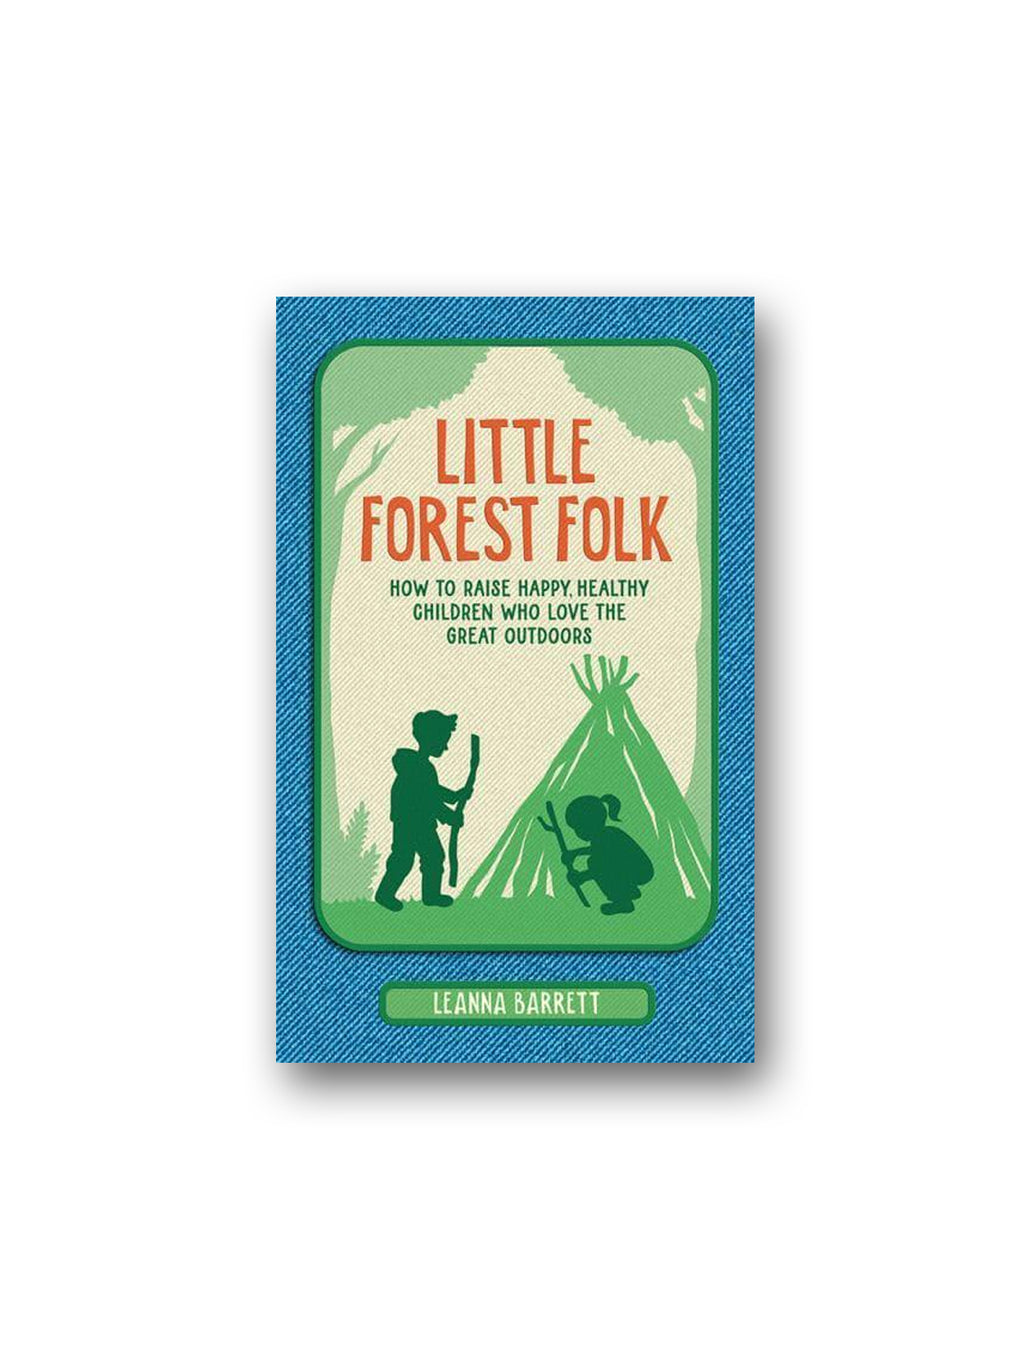 Little Forest Folk : How to Raise Happy, Healthy Children Who Love the Great Outdoors